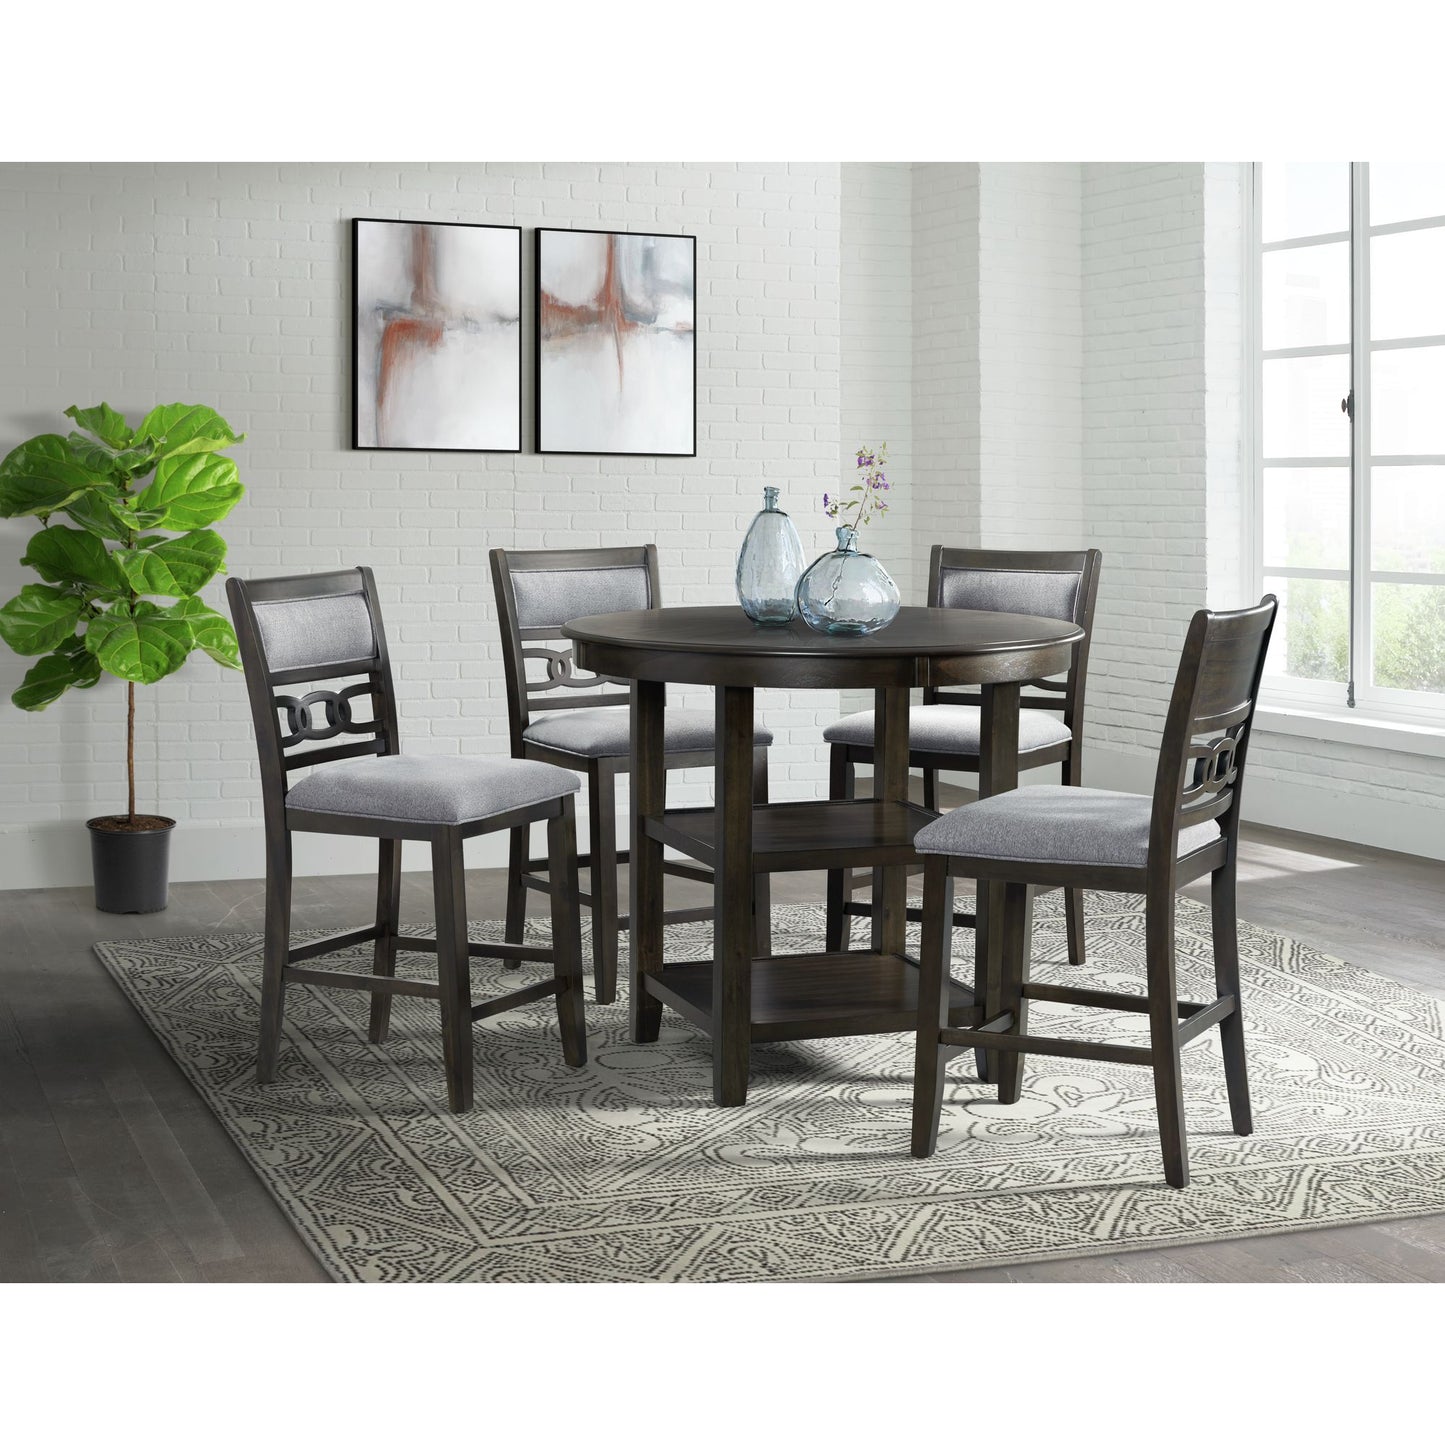 Amherst - Counter Height Dining Table